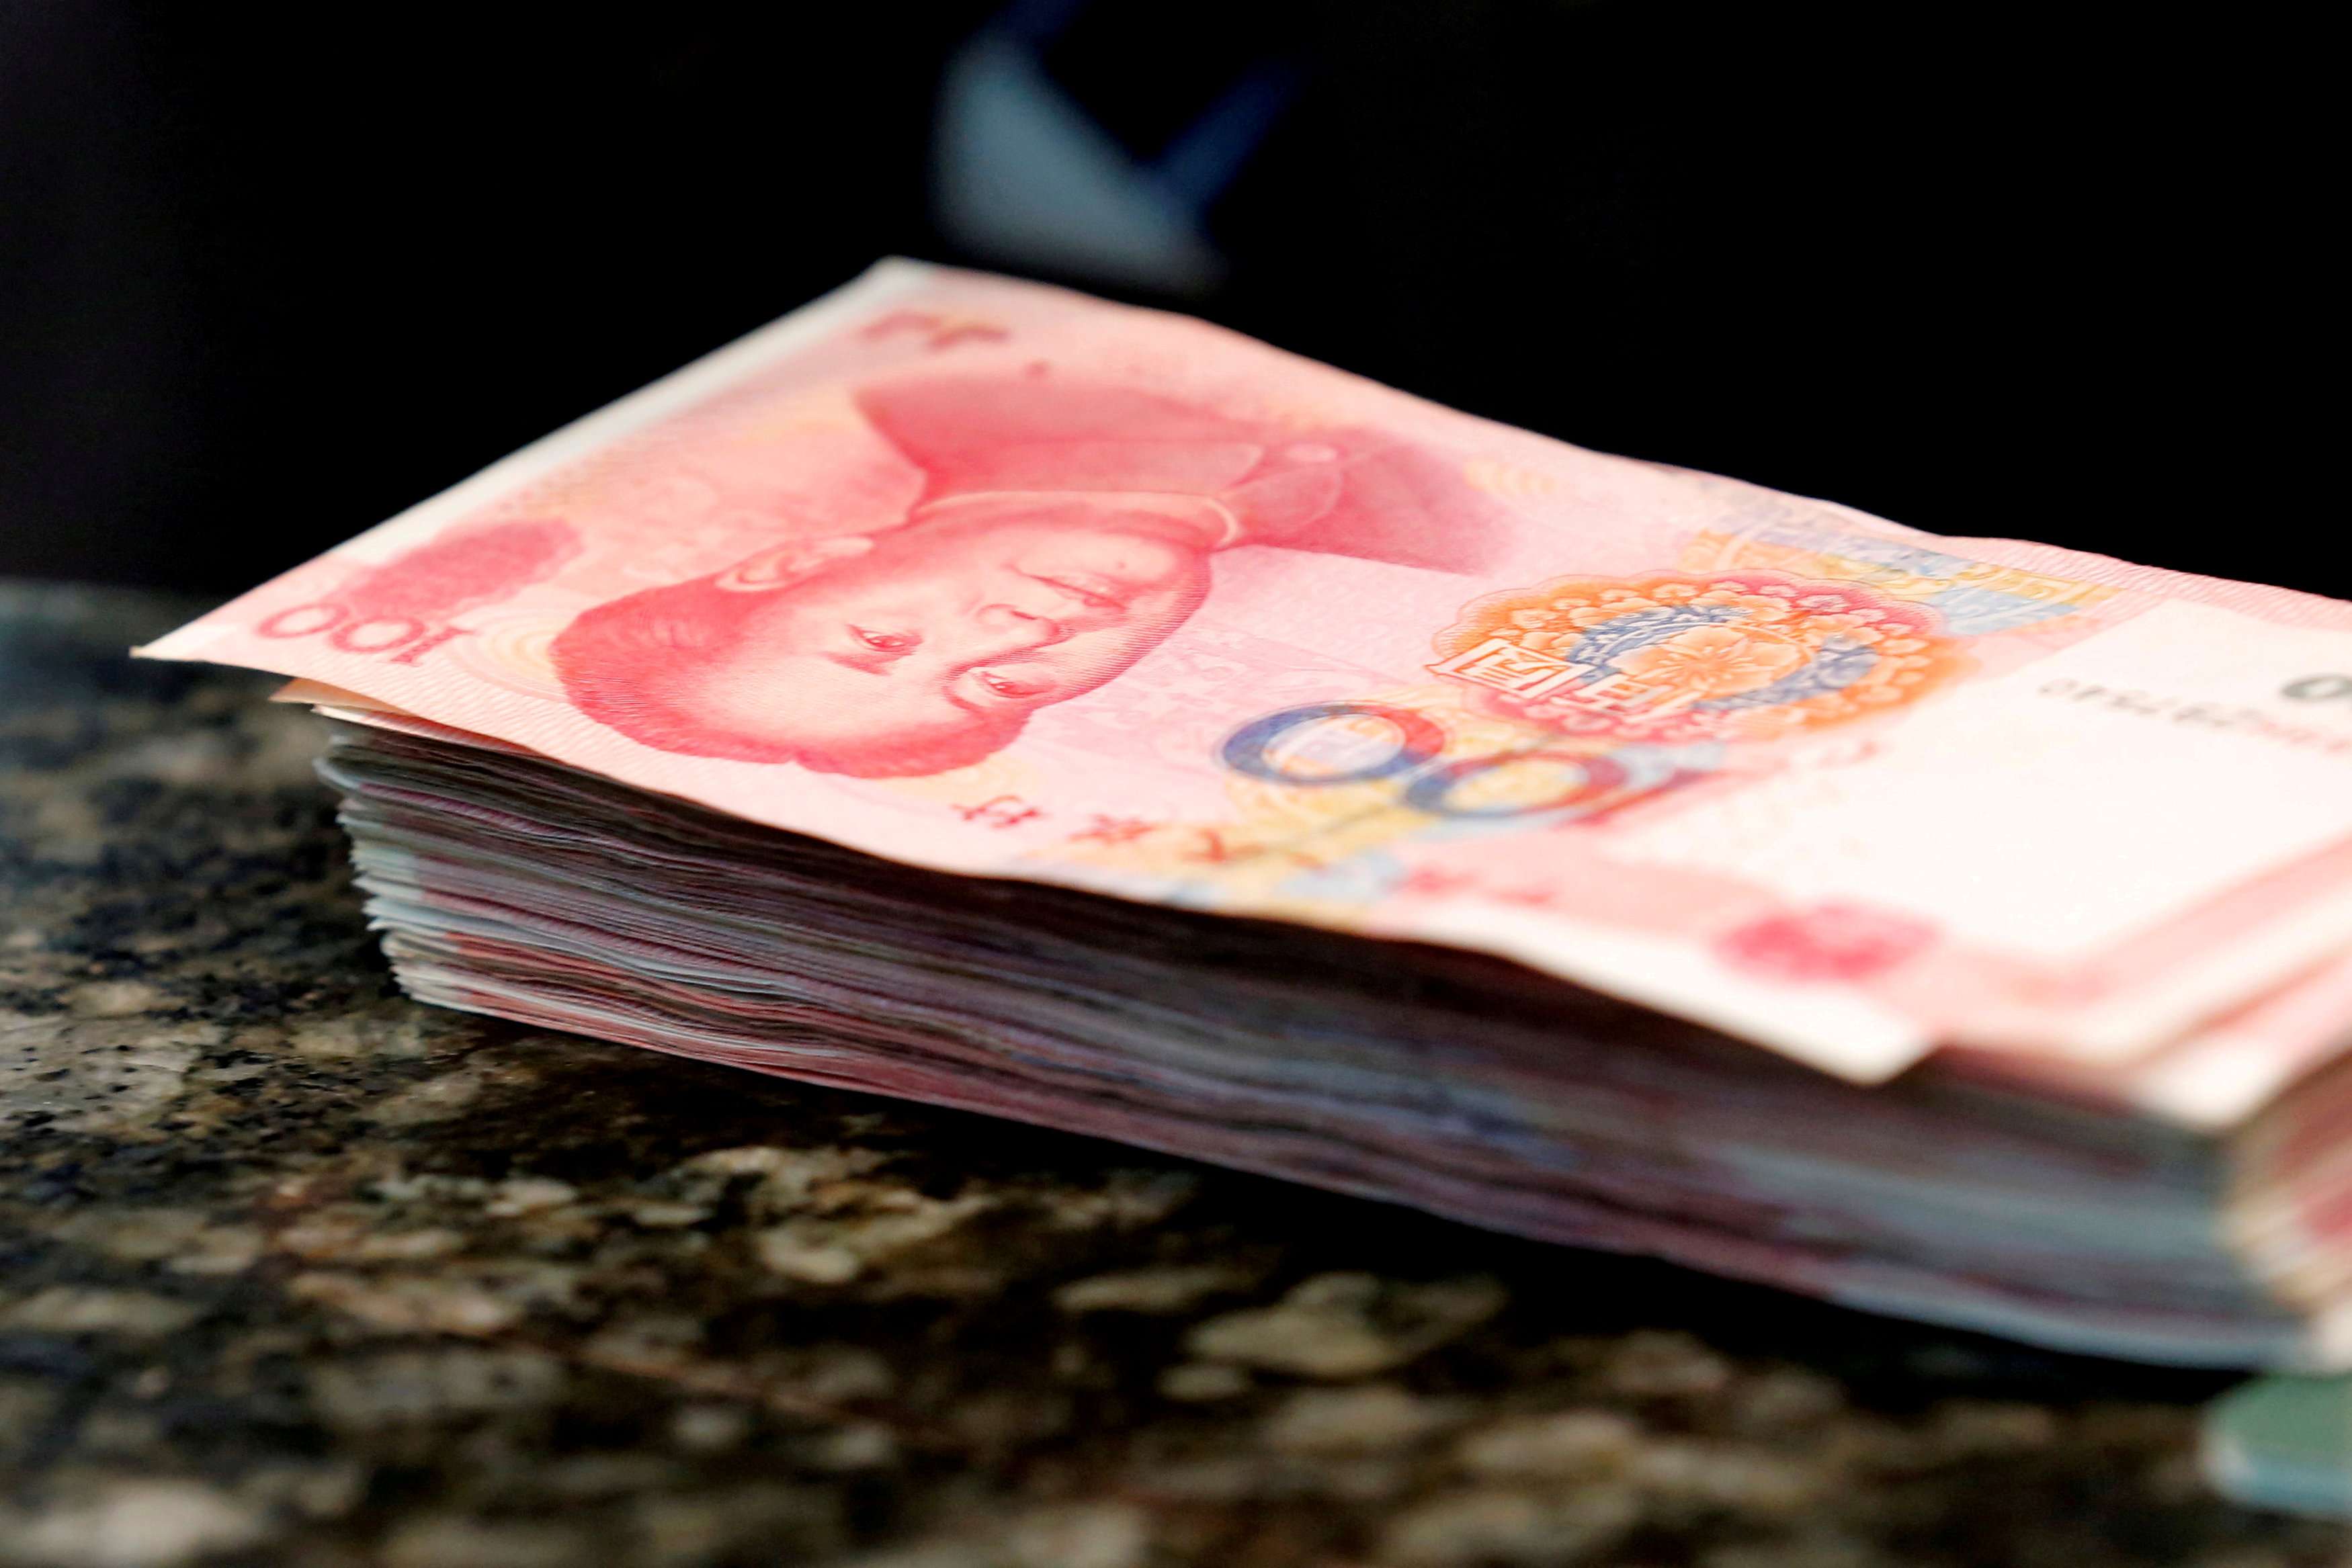 The yuan is trading below the critical level of 6.8 against the dollar. Photo: Reuters